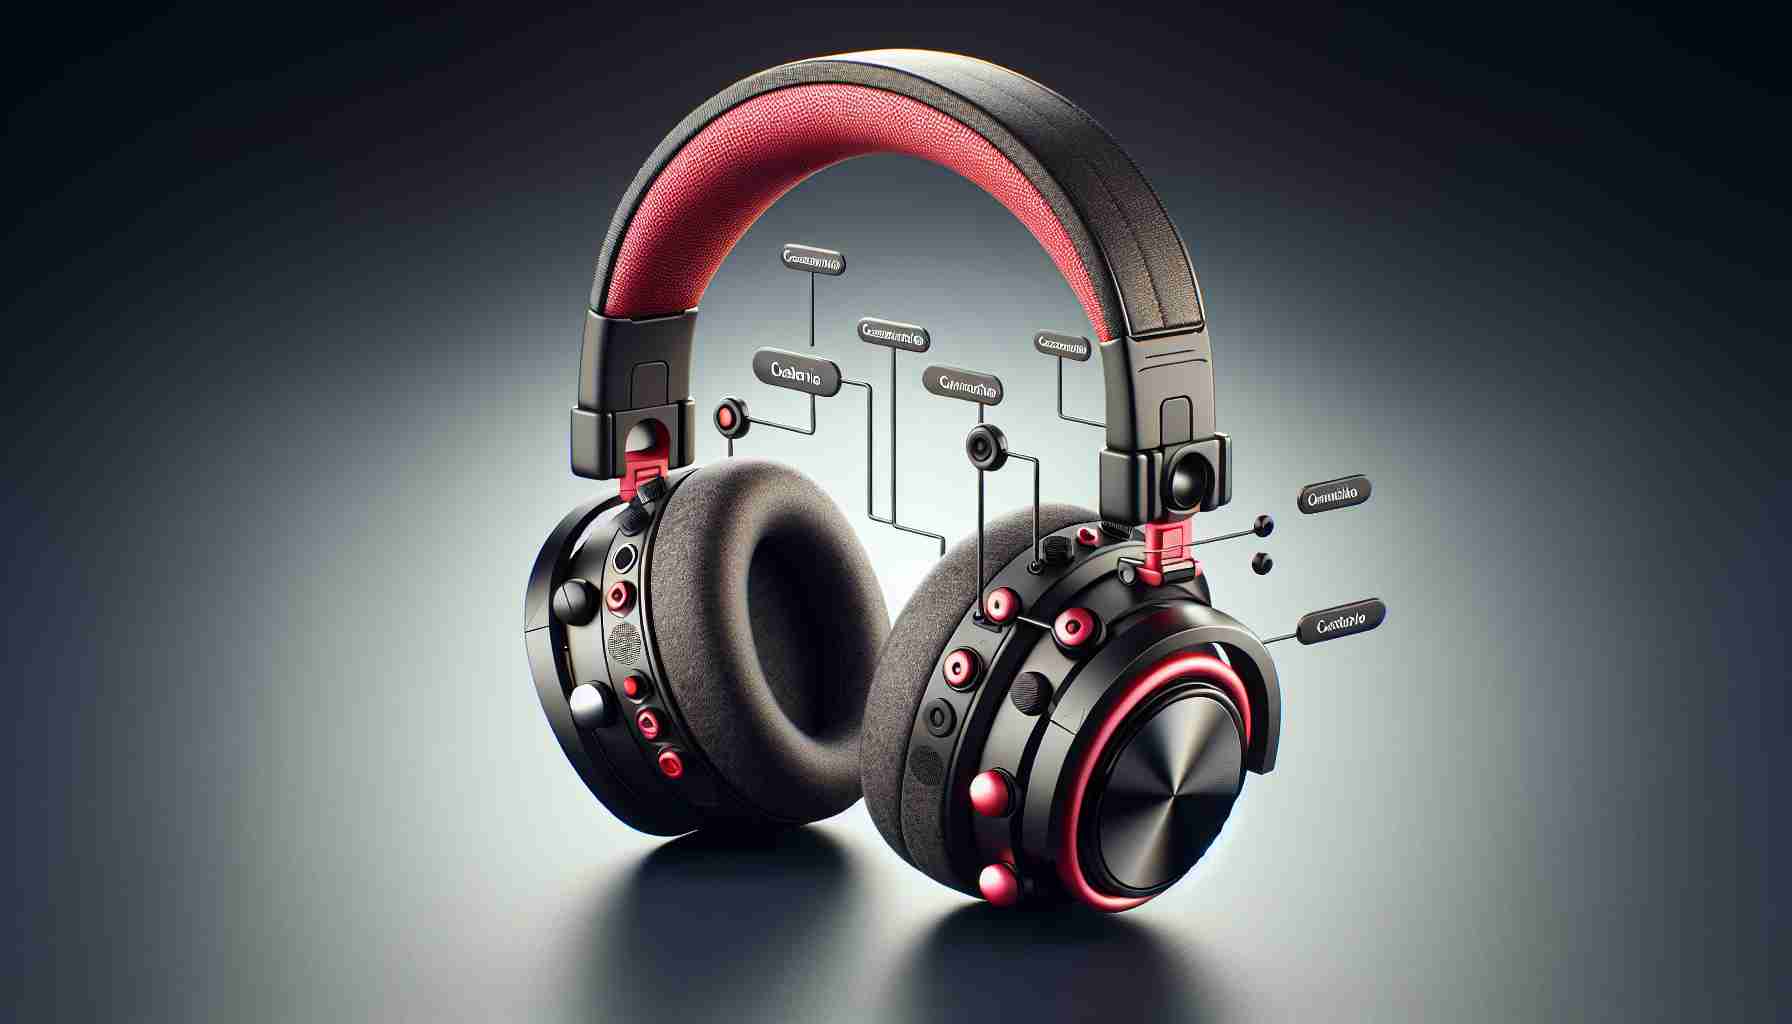 Create a realistic, high-definition image of a pair of customizable headphones. The headphones should embody personal style and uniqueness, featuring visually appealing elements that stand out and make a statement. The design of the headphones should be innovative, with elements like interchangeable parts or unique materials that highlight the concept of personal customization. Lastly, the dominant color of the headphones should be a bold, striking red, adding a touch of vibrancy and energy to the overall look.